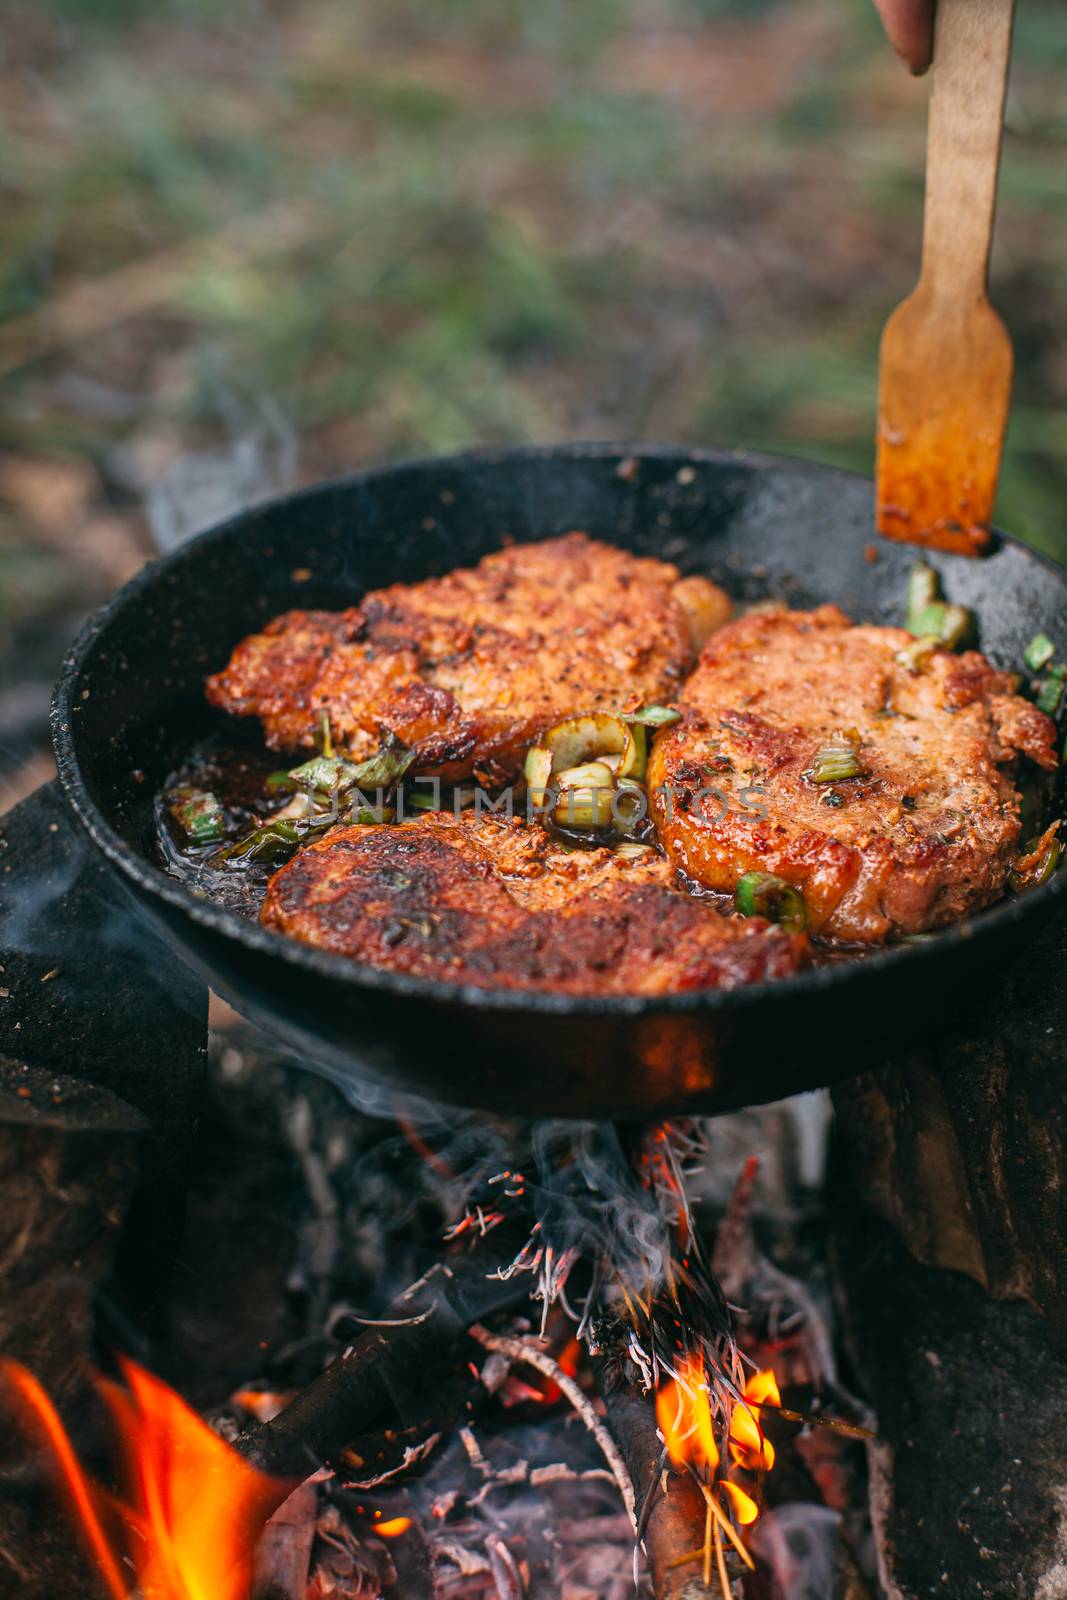 Frying meat in a pan over an open fire with leek. Steak in a pan on a fire. Cooking in nature. Picnic. Grill on fire. Hand with a wooden spatula.